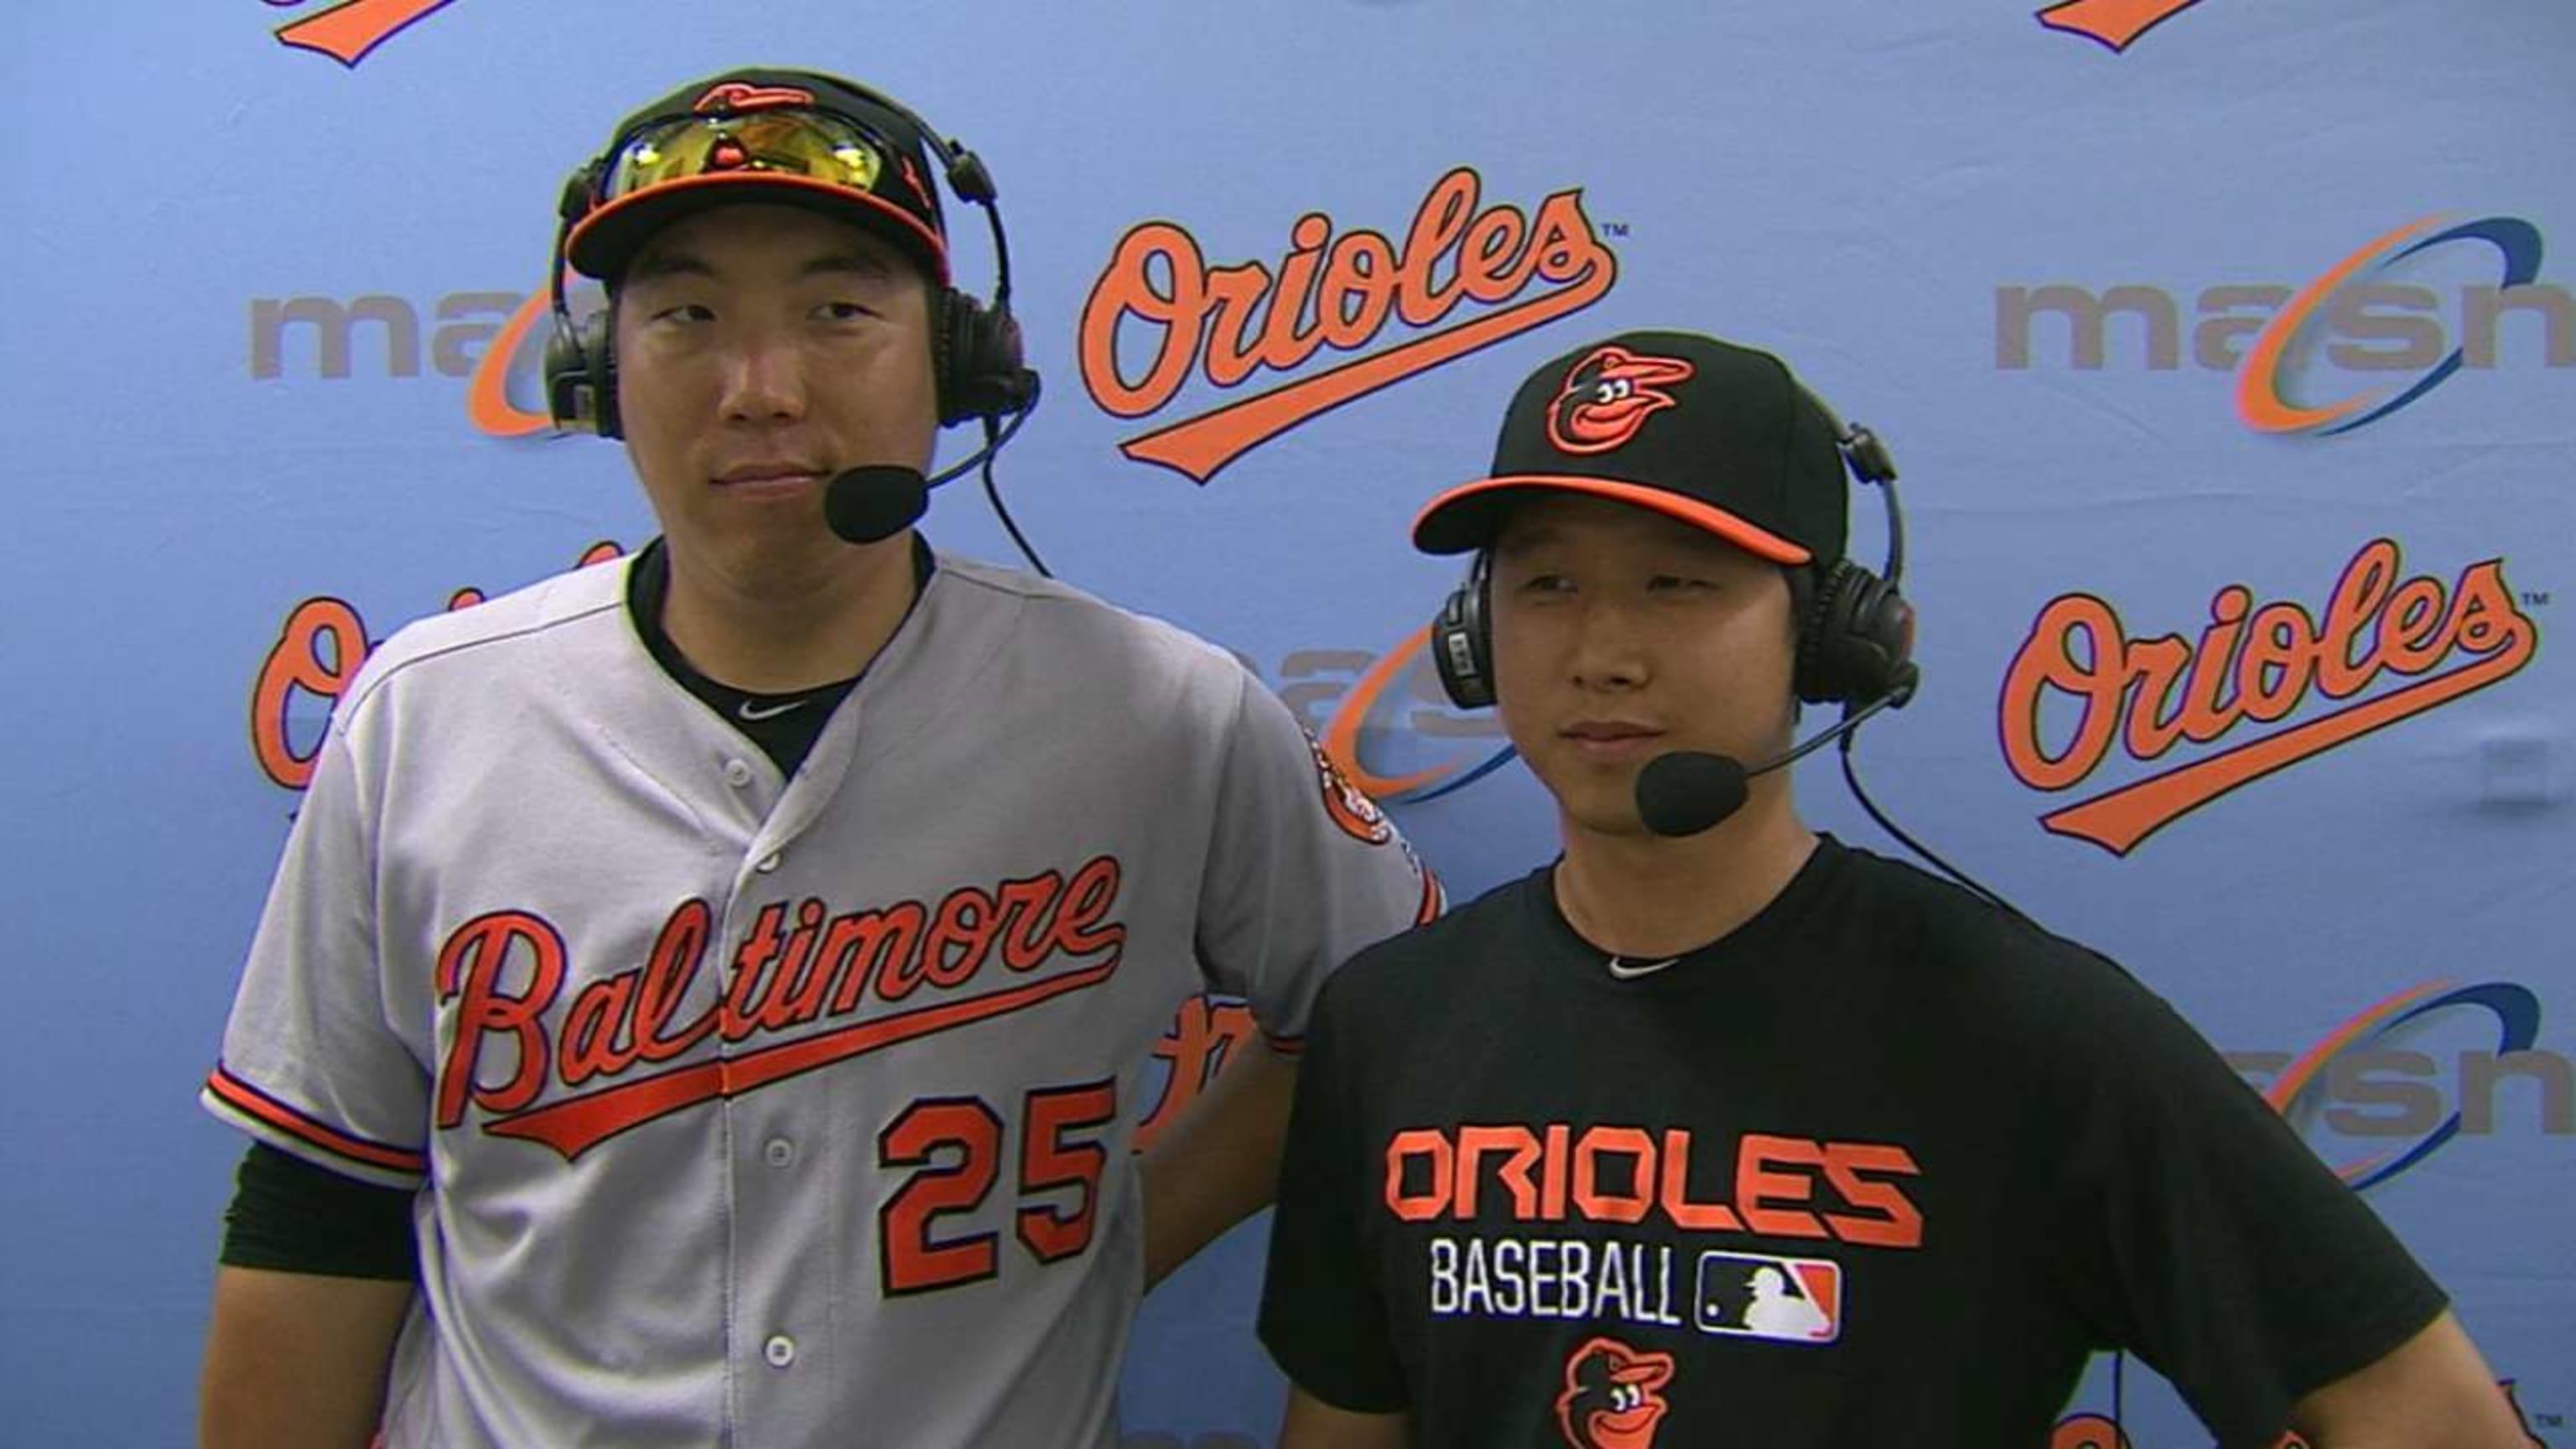 Orioles outfielder Hyun Soo Kim on the cover of 'MLB The Show 17